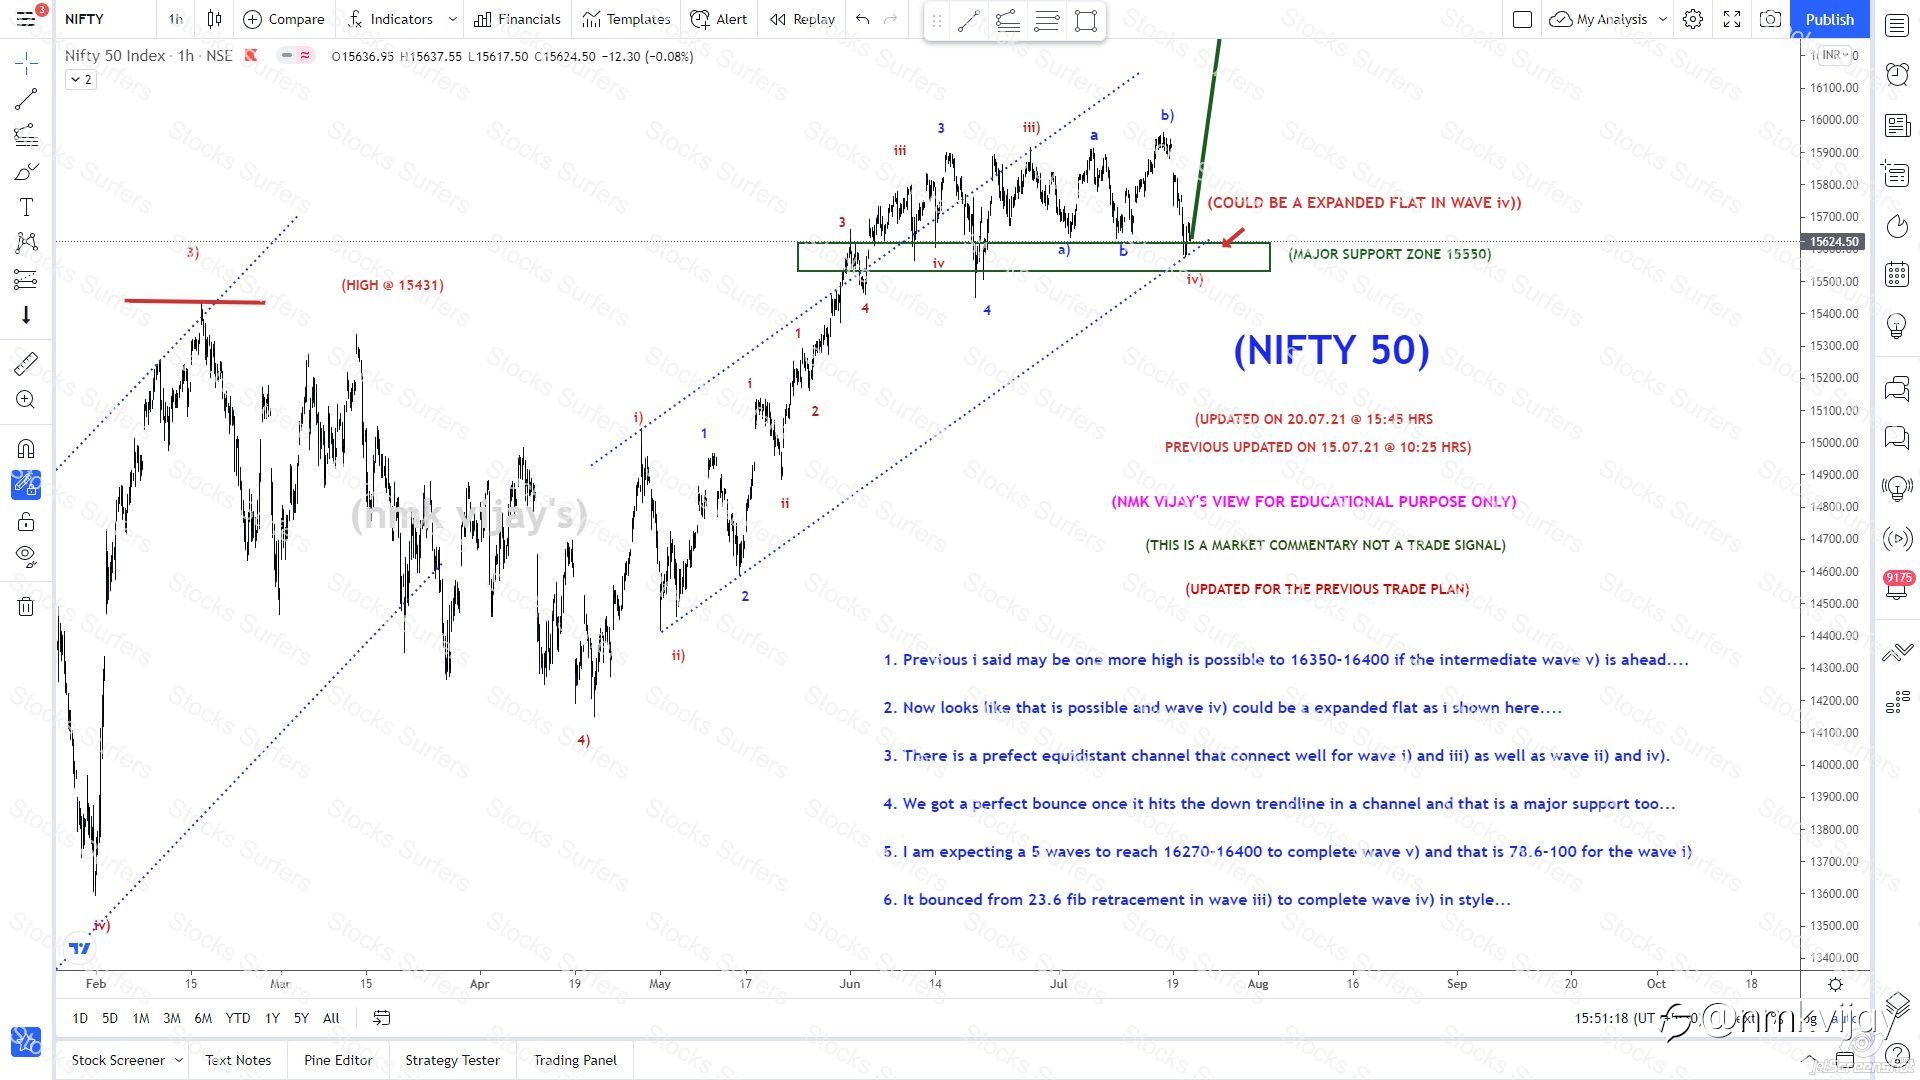 NIFTY-Wave iv) completed and wave v) to 16270-400 ?